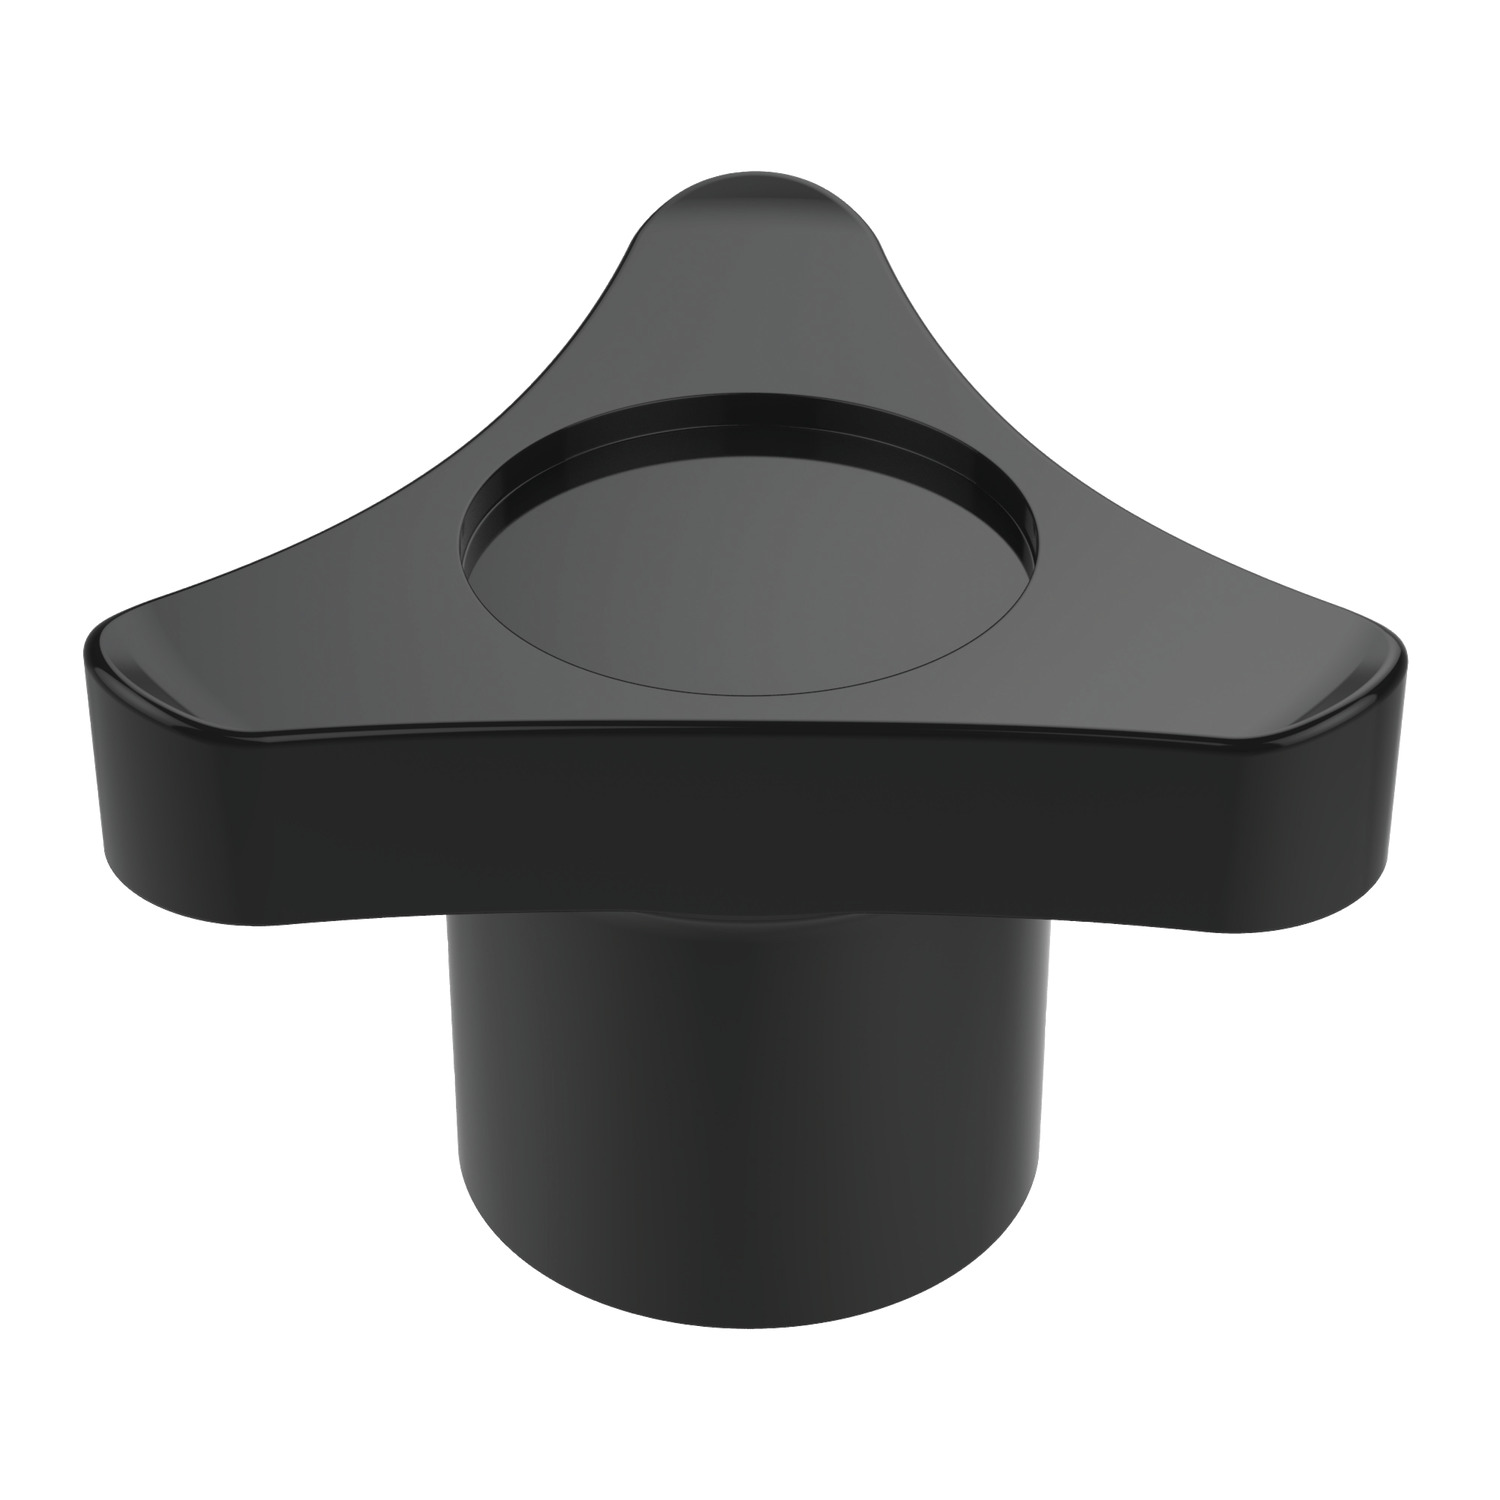 Three Lobed Knobs Black Duroplast three lobed knobs. Sizes from M5 up to M16. Parts available from stock.